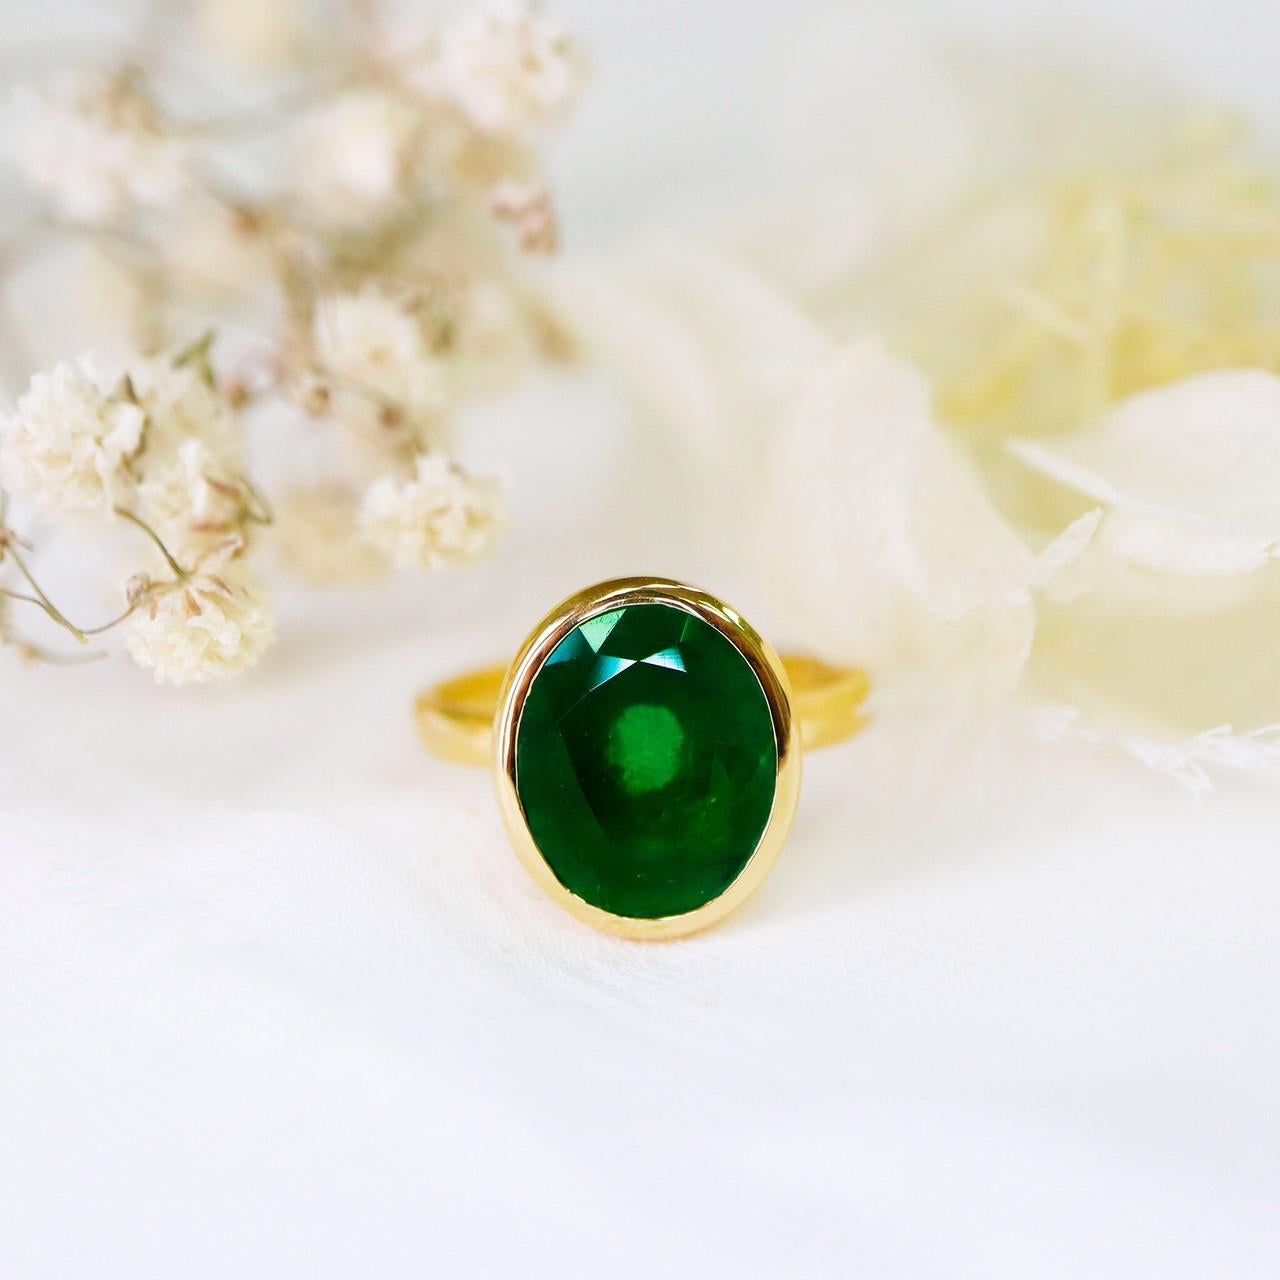 **IGI 18K Yellow Gold 4.05 Ct Natural Emerald Diamond Antique Art Deco Engagement Ring**
IGI-Certified natural Zambia green with great luster emerald as the center stone weighing 4.05 set on the 18-carat yellow gold bezel setting design band. 

The